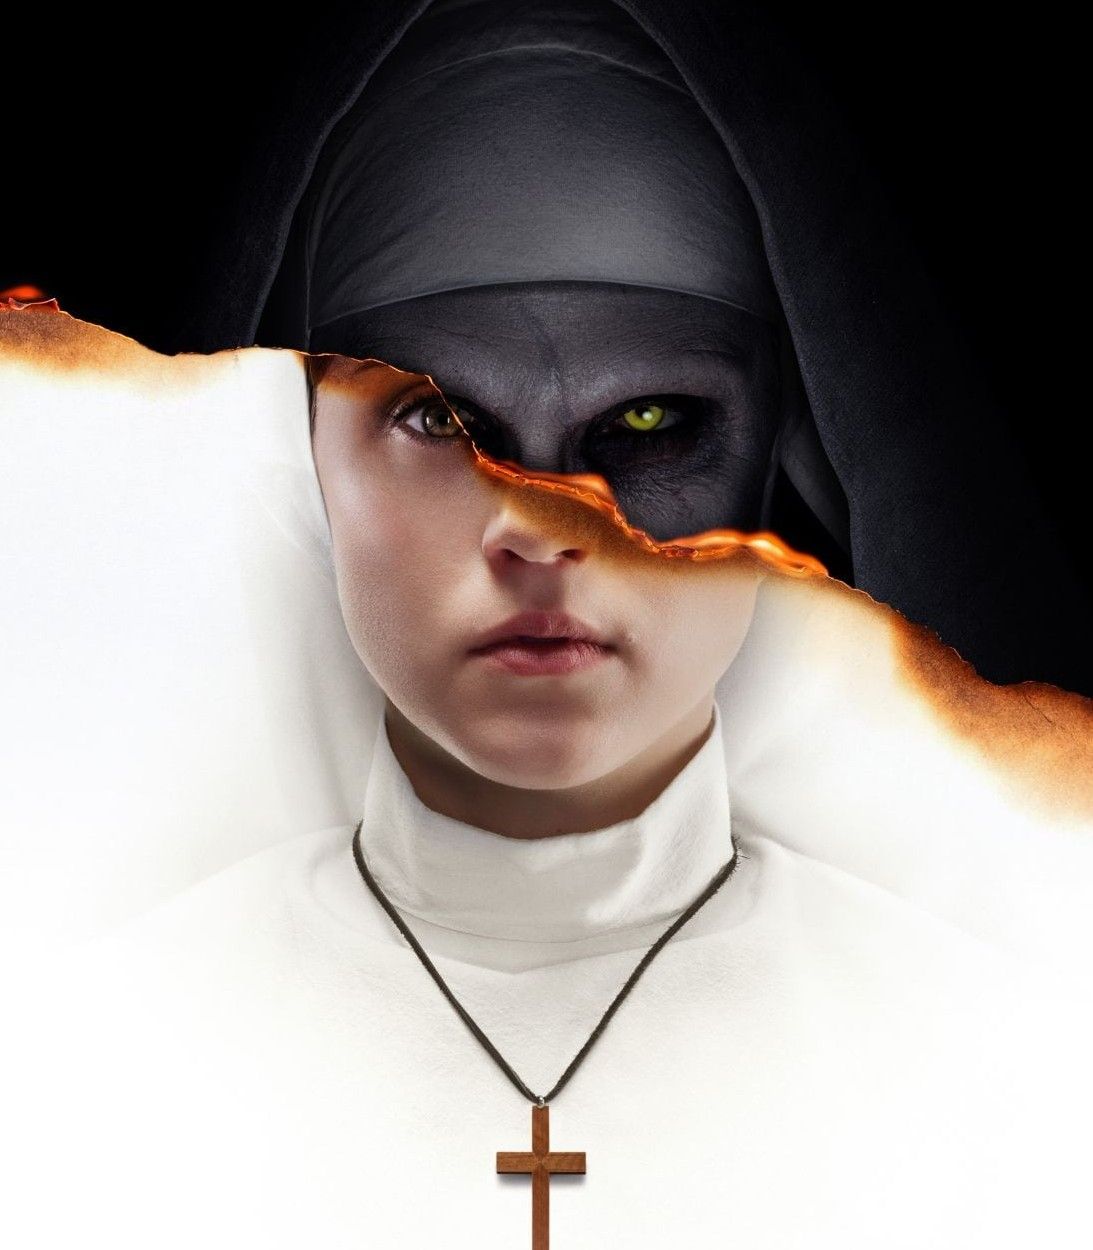 The Nun Conjuring poster TLDR